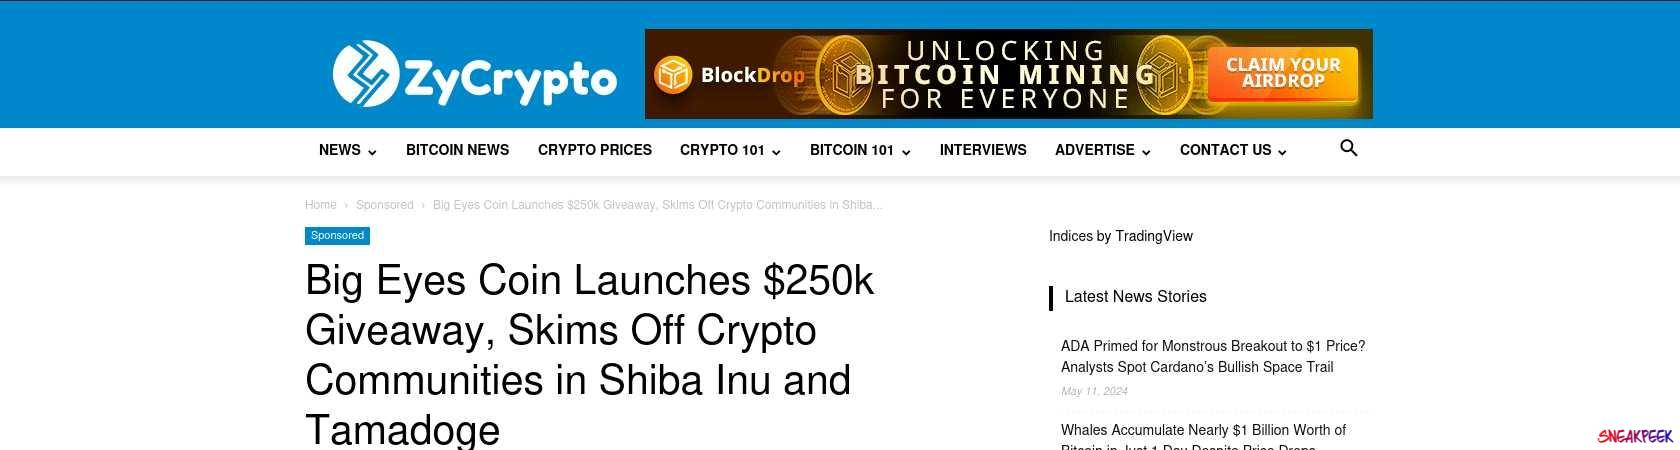 Read the full Article:  ⭲ Big Eyes Coin Launches $250k Giveaway, Skims Off Crypto Communities in Shiba Inu and Tamadoge